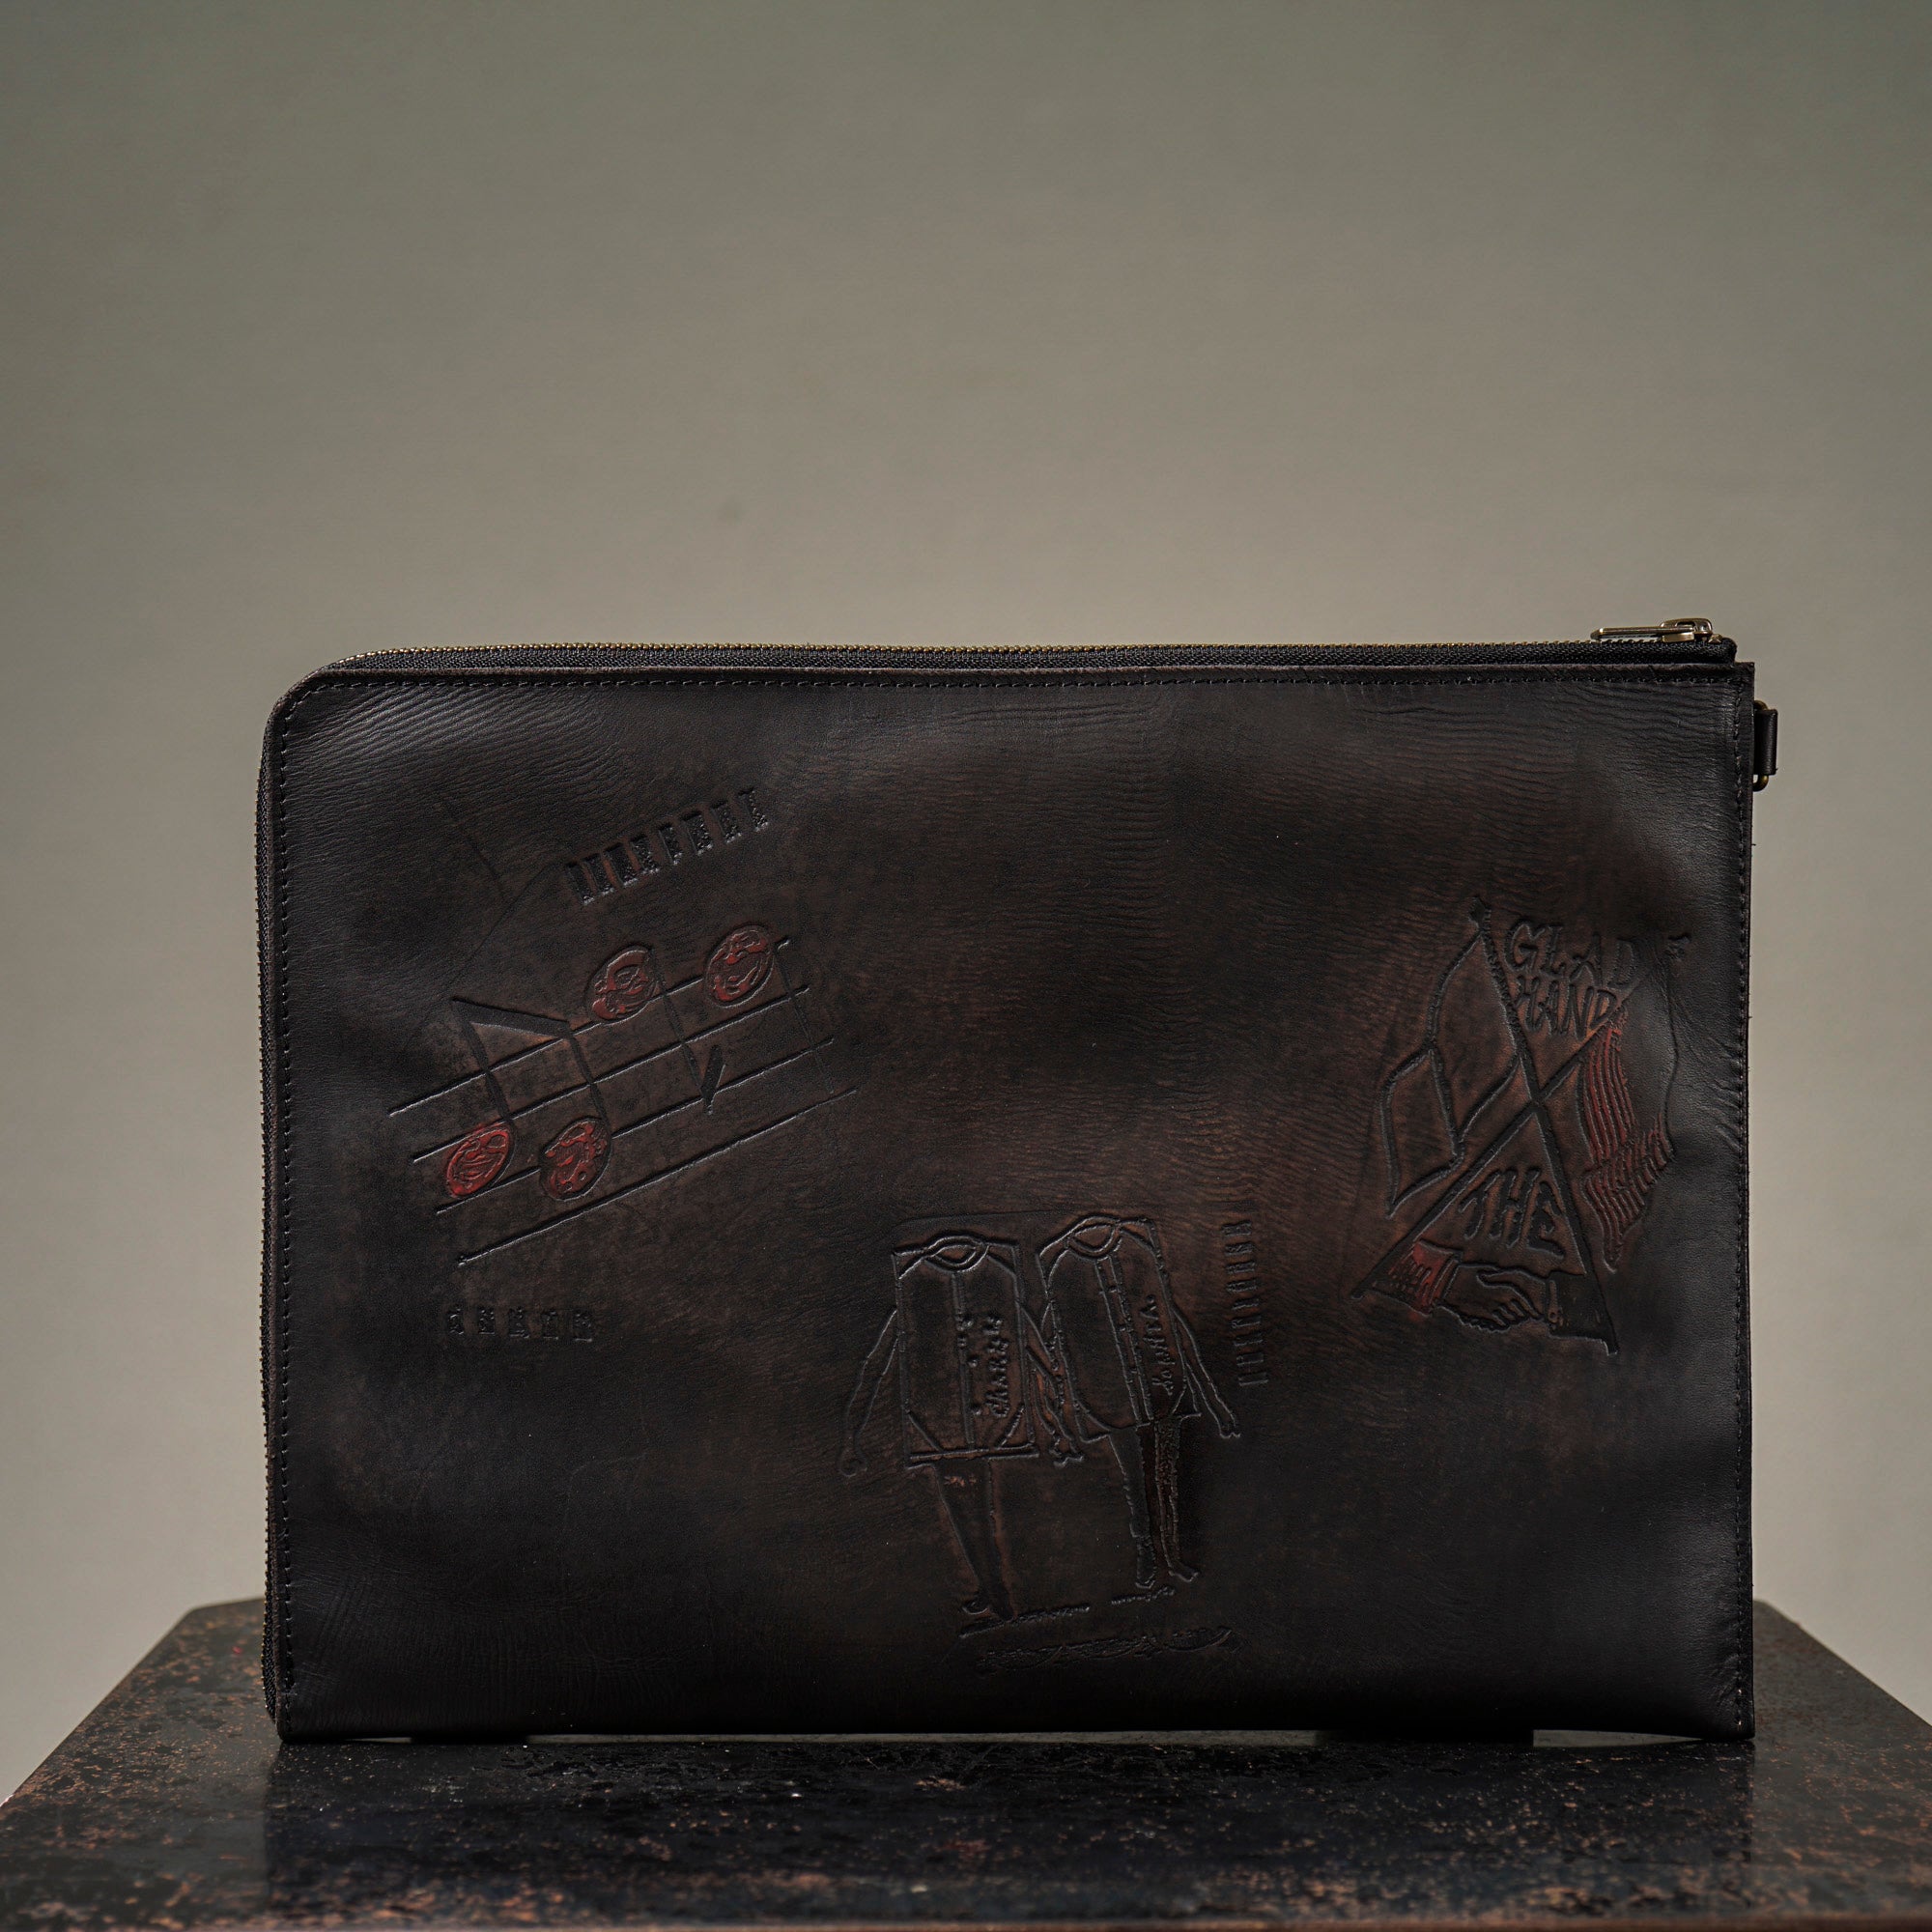 BAG & WALLET – GLADHAND & Co.